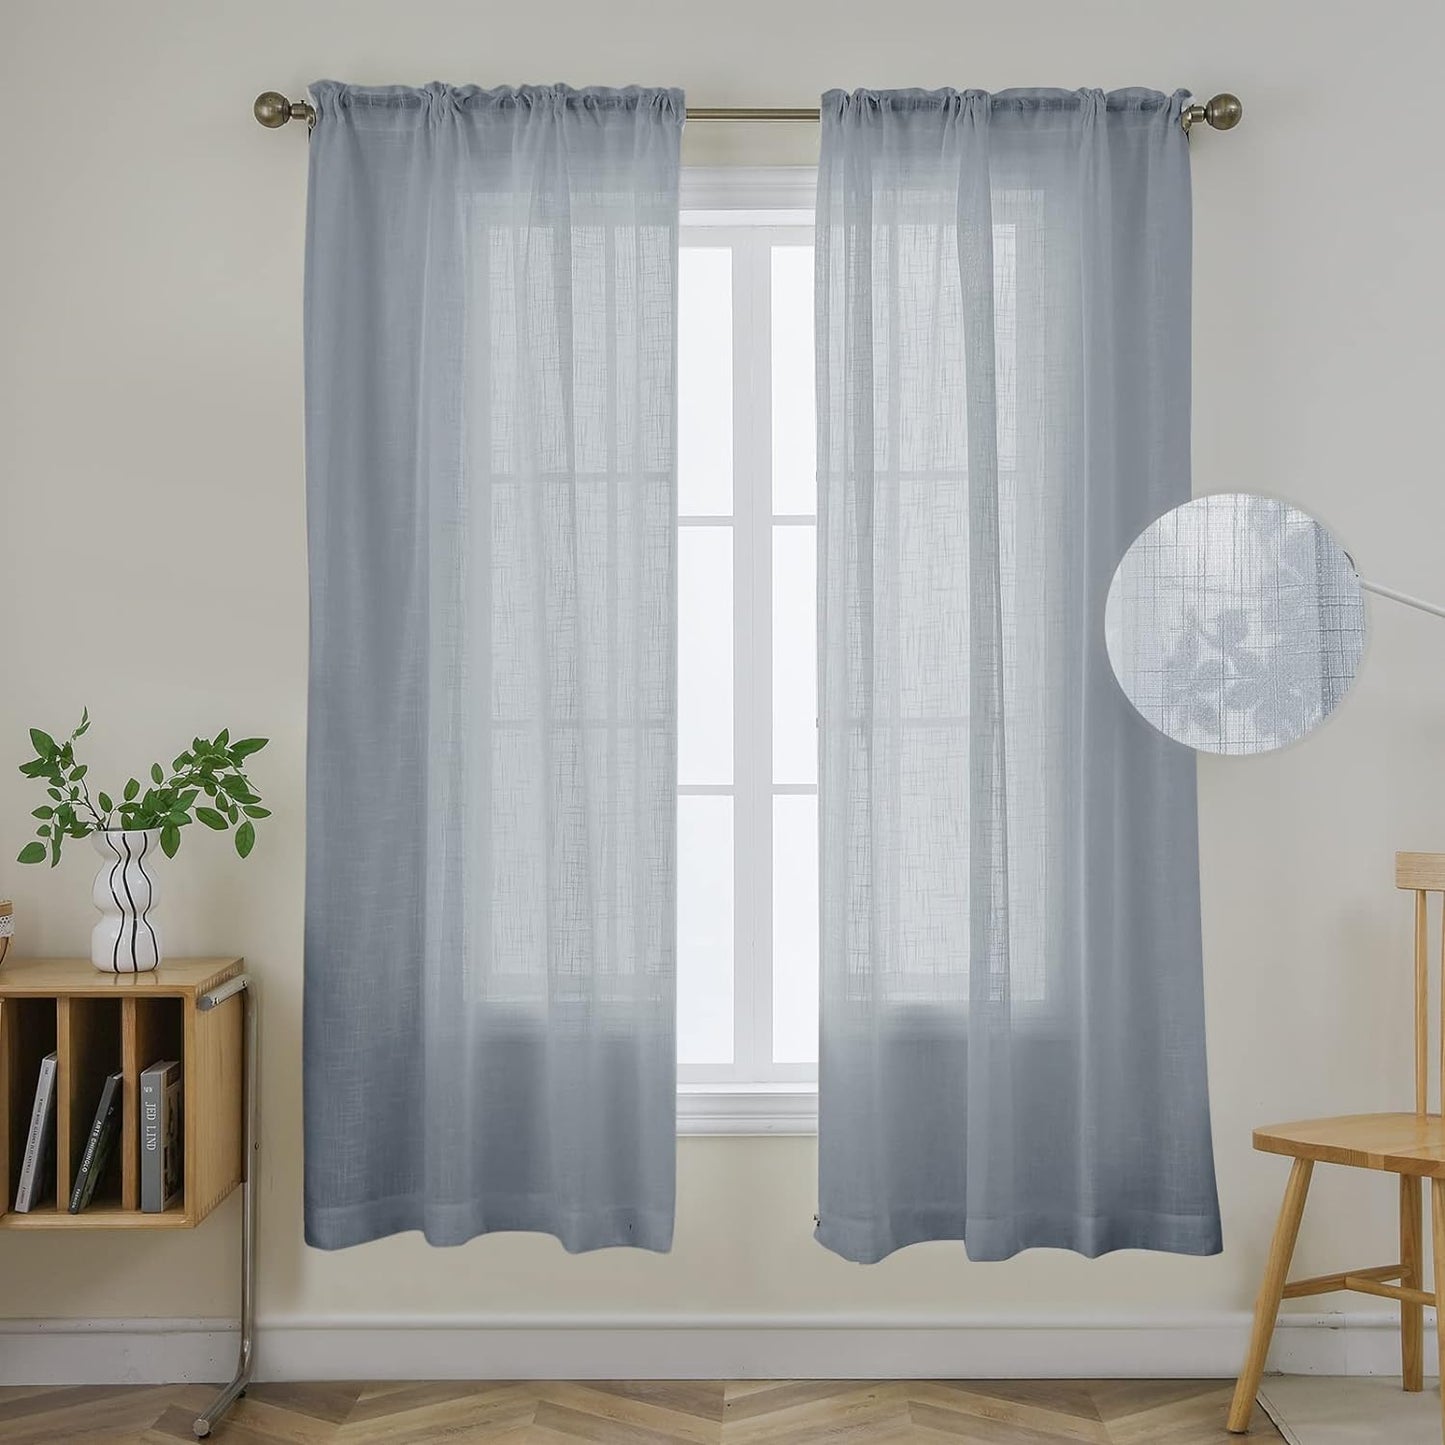 Joydeco White Sheer Curtains 63 Inch Length 2 Panels Set, Rod Pocket Long Sheer Curtains for Window Bedroom Living Room, Lightweight Semi Drape Panels for Yard Patio (54X63 Inch, off White)  Joydeco Floral Embroidery-Grey 54W X 63L Inch X 2 Panels 